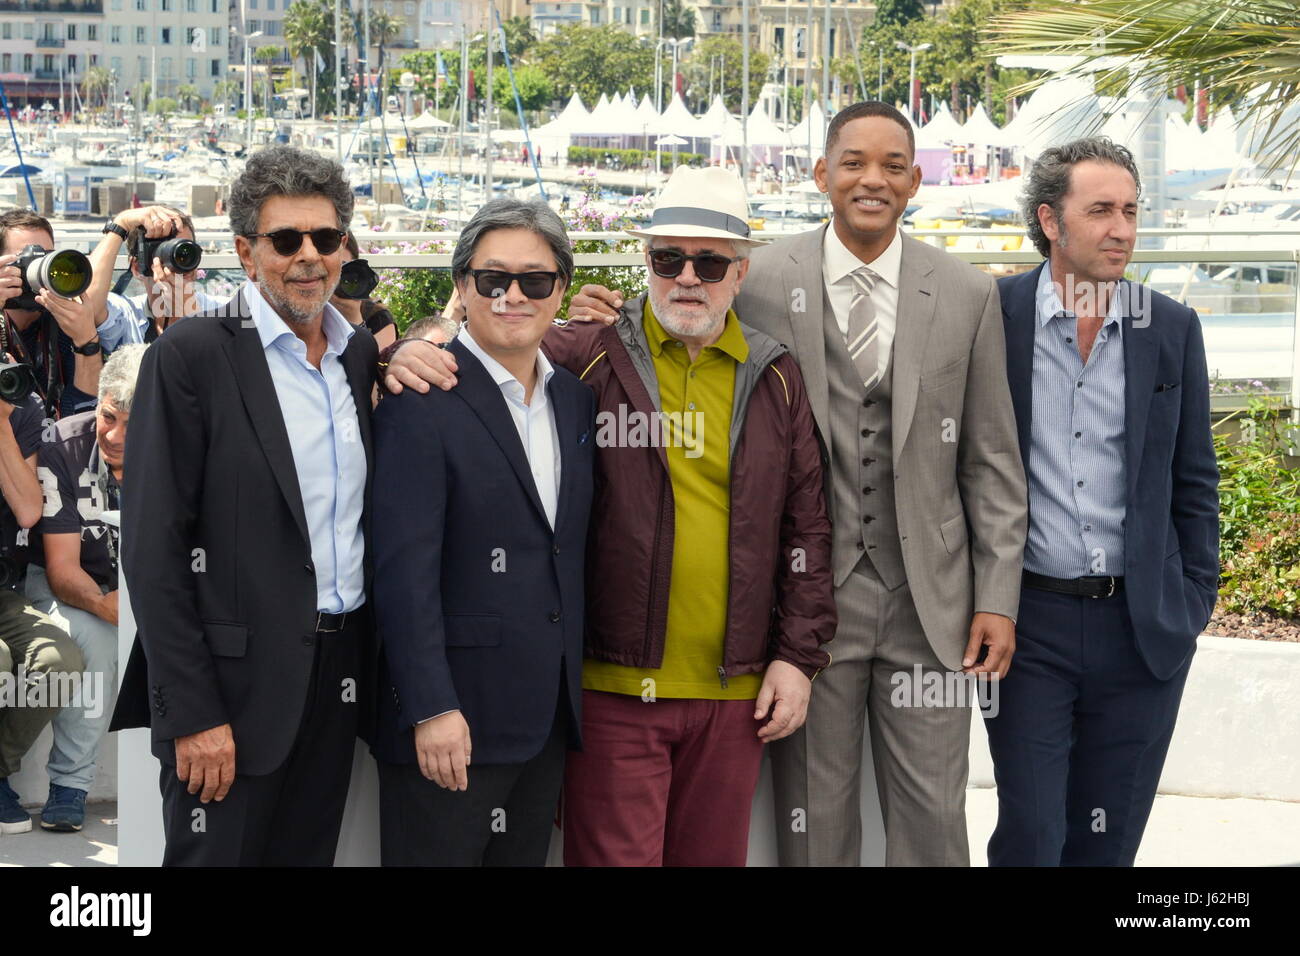 May 11, 2016 - Cannes, France - CANNES, FRANCE - MAY 17: (L-R) Jury members Gabriel Yared, Park Chan-wook, President of the jury Pedro Almodovar, jury members Will Smith and Paolo Sorrentino attends the Jury photocall during the 70th annual Cannes Film Festival at Palais des Festivals on May 17, 2017 in Cannes, France (Credit Image: © Frederick Injimbert via ZUMA Wire) Stock Photo